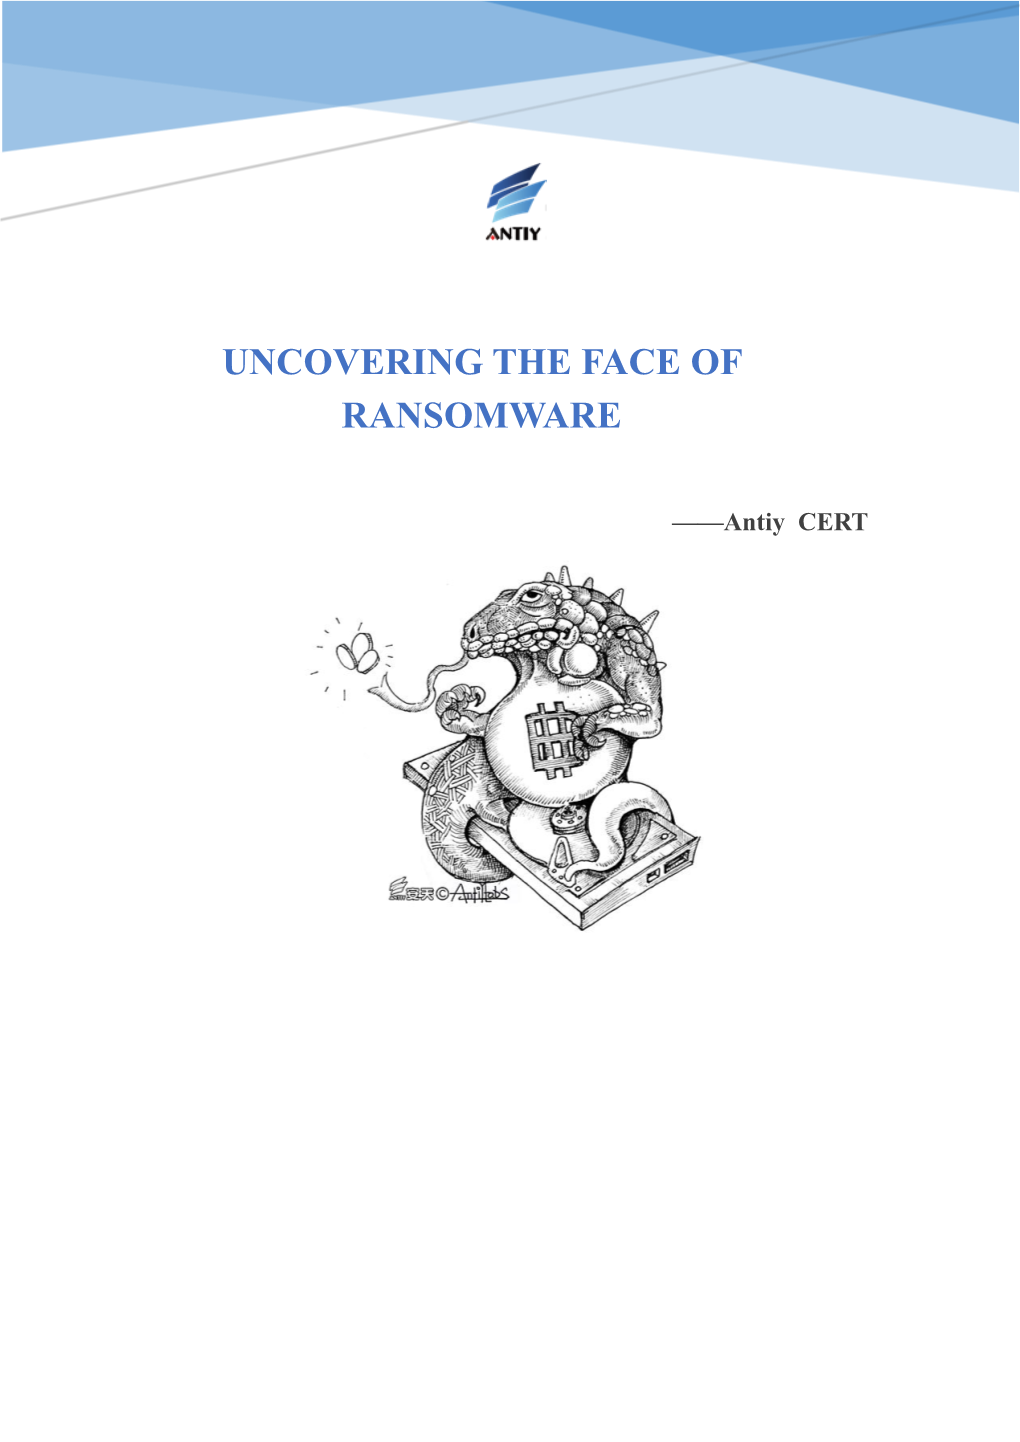 Uncovering the Face of Ransomware